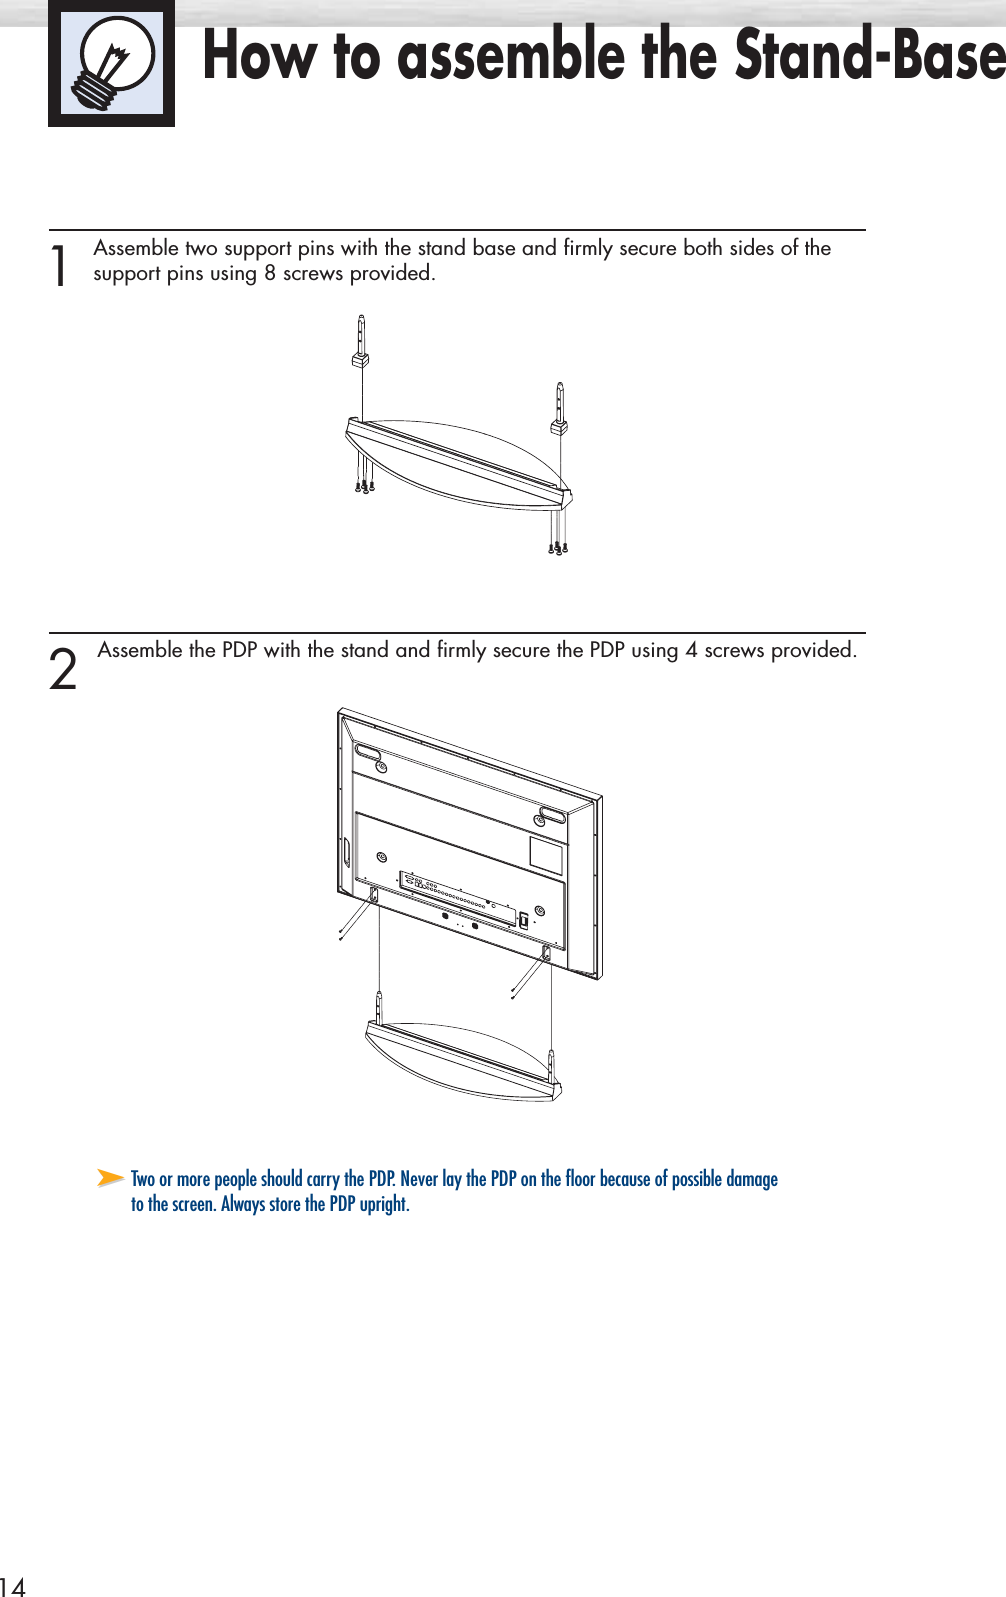 14How to assemble the Stand-Base1 Assemble two support pins with the stand base and firmly secure both sides of the support pins using 8 screws provided.2 Assemble the PDP with the stand and firmly secure the PDP using 4 screws provided.➤➤Two or more people should carry the PDP. Never lay the PDP on the floor because of possible damageto the screen. Always store the PDP upright.